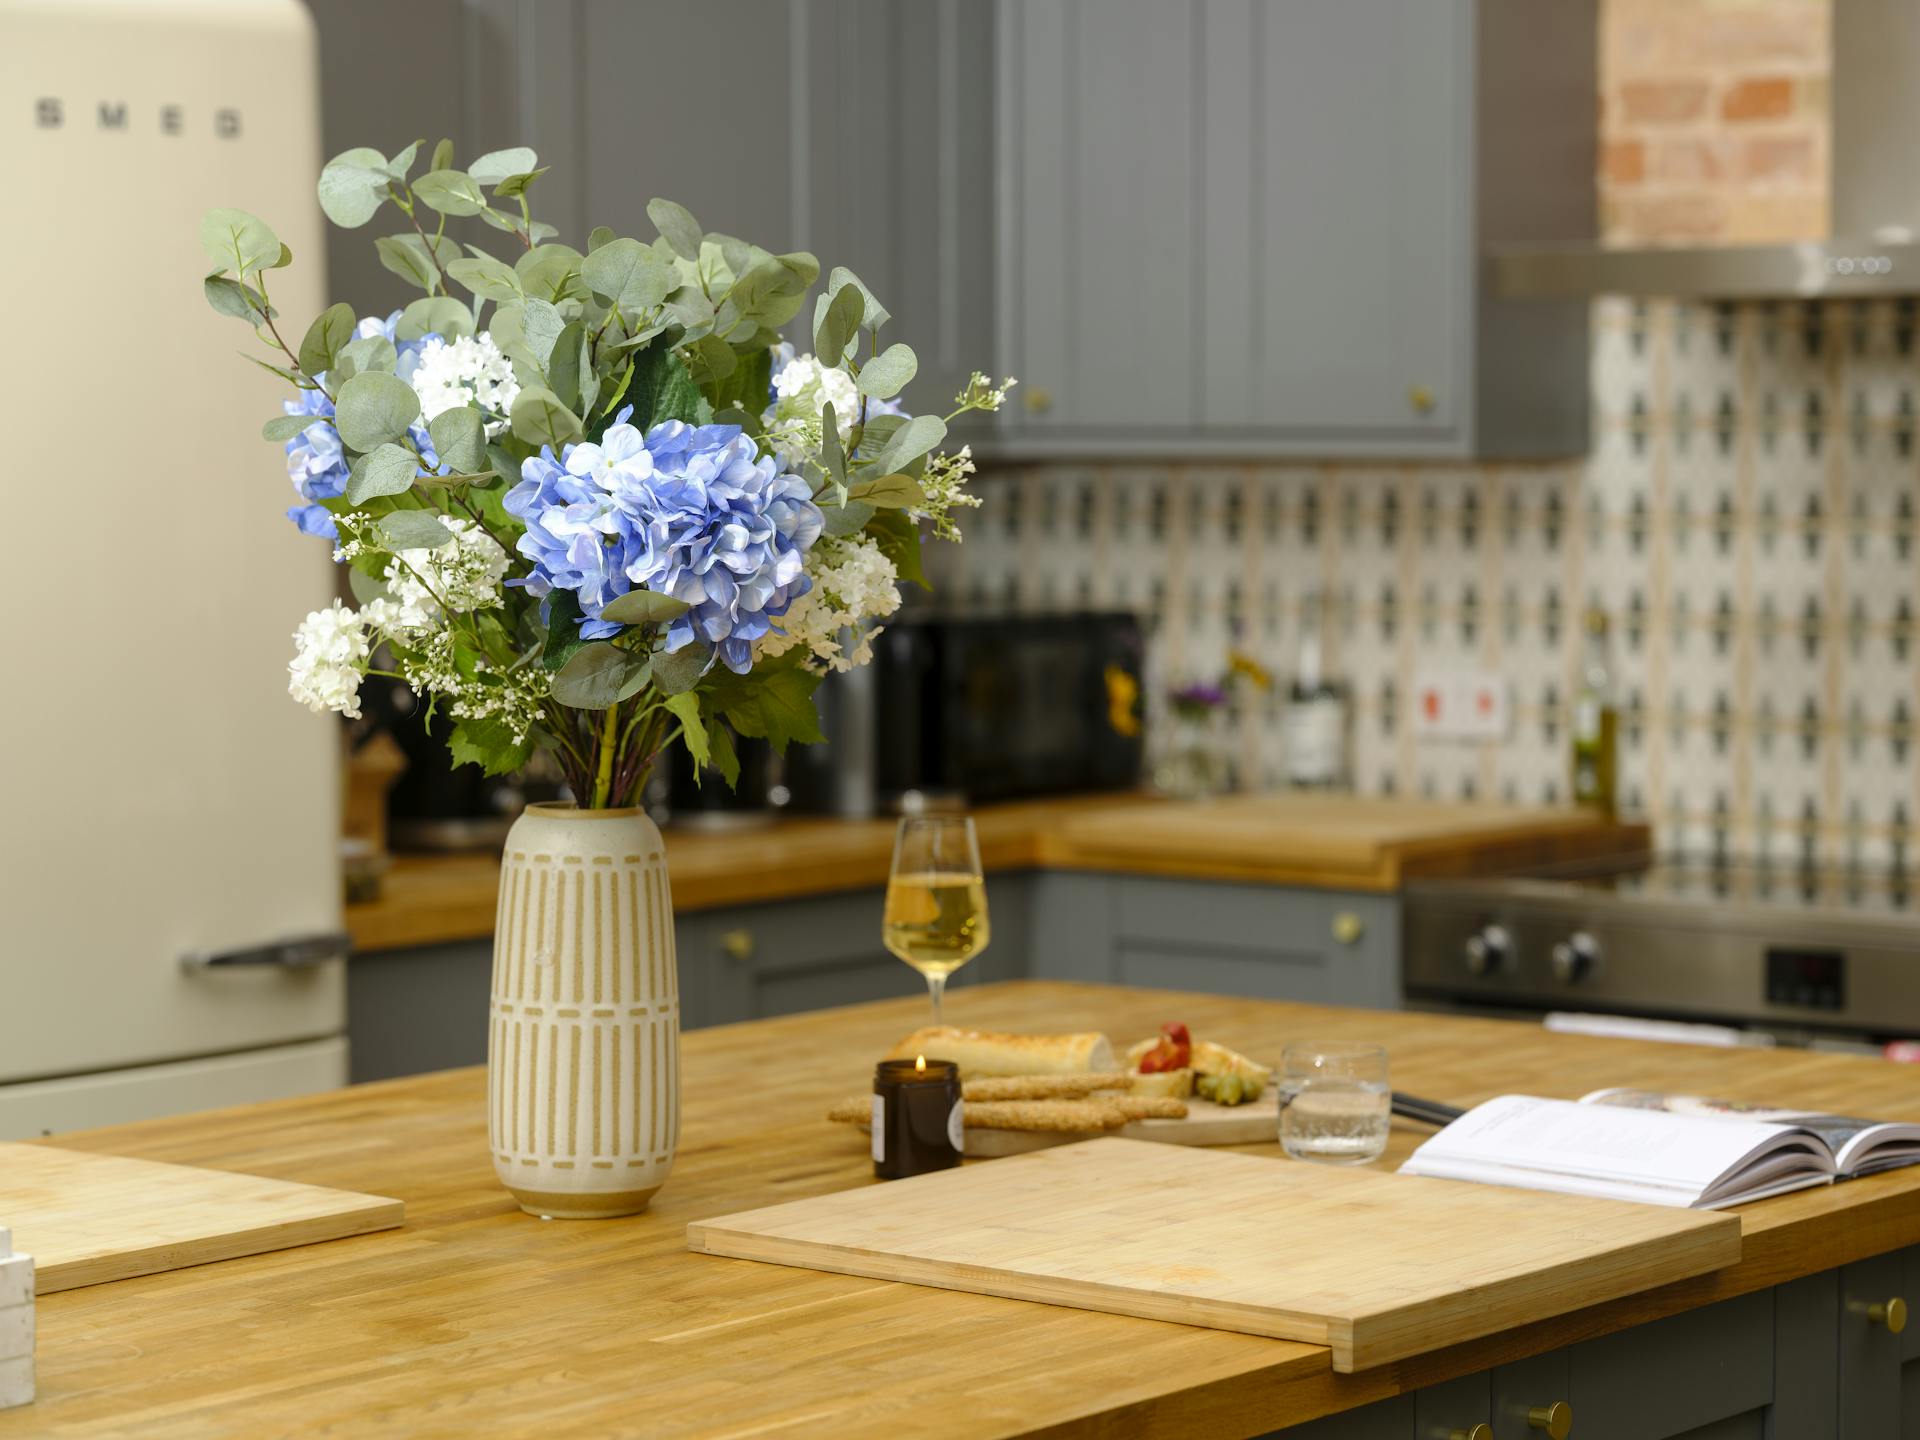 Artificial blue hydrangea bouquet on a kitchen table next to bread and wine